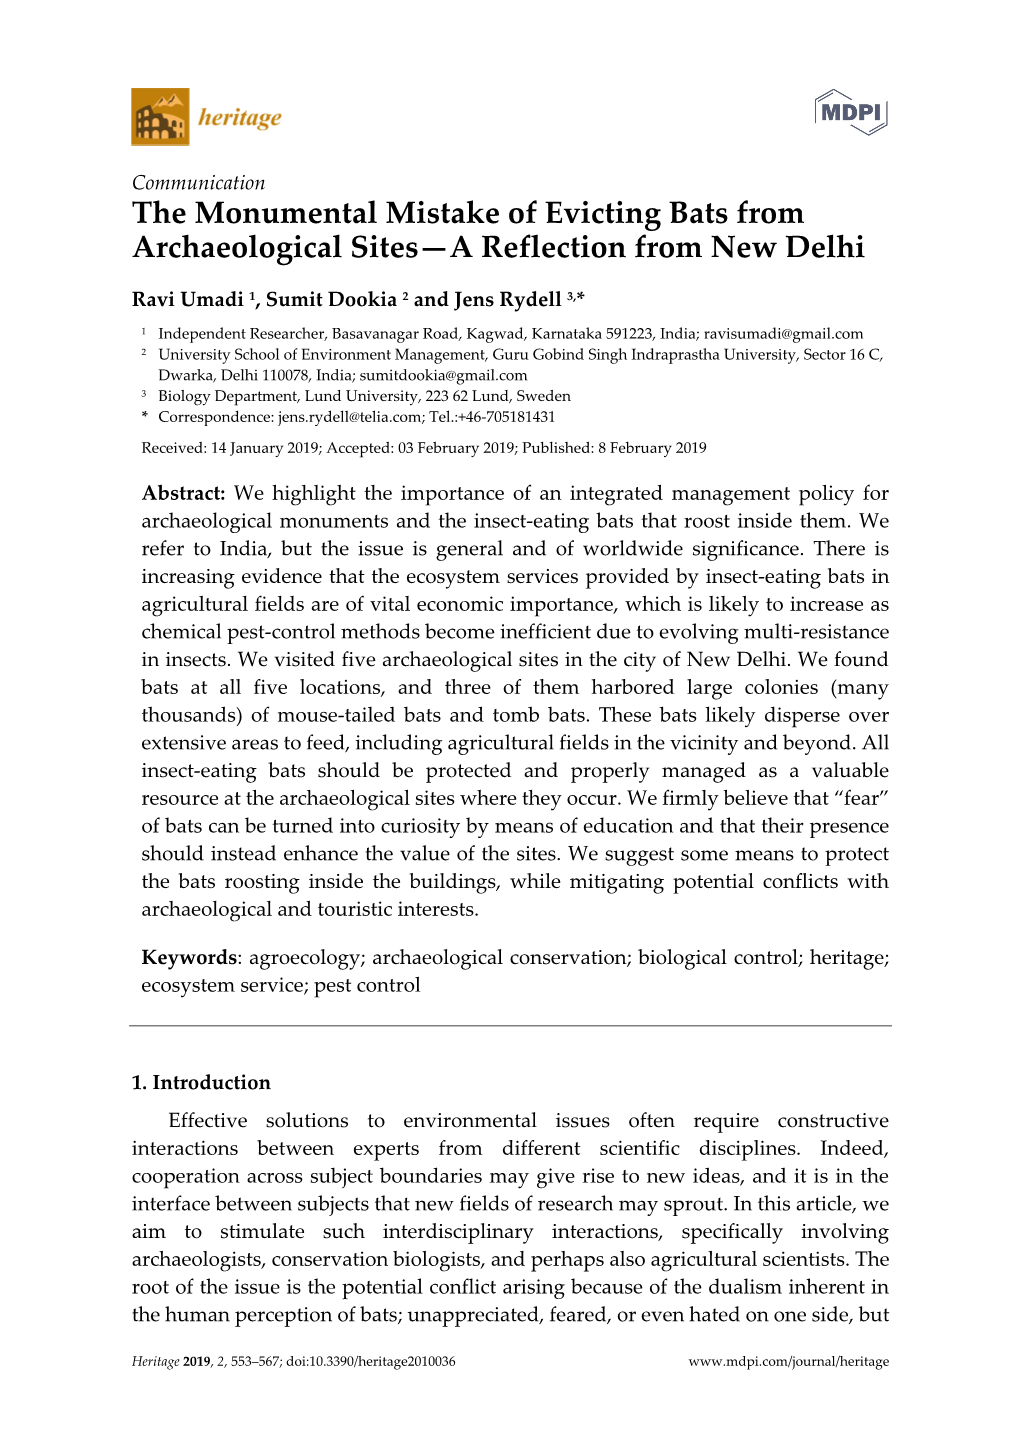 The Monumental Mistake of Evicting Bats from Archaeological Sites—A Reflection from New Delhi